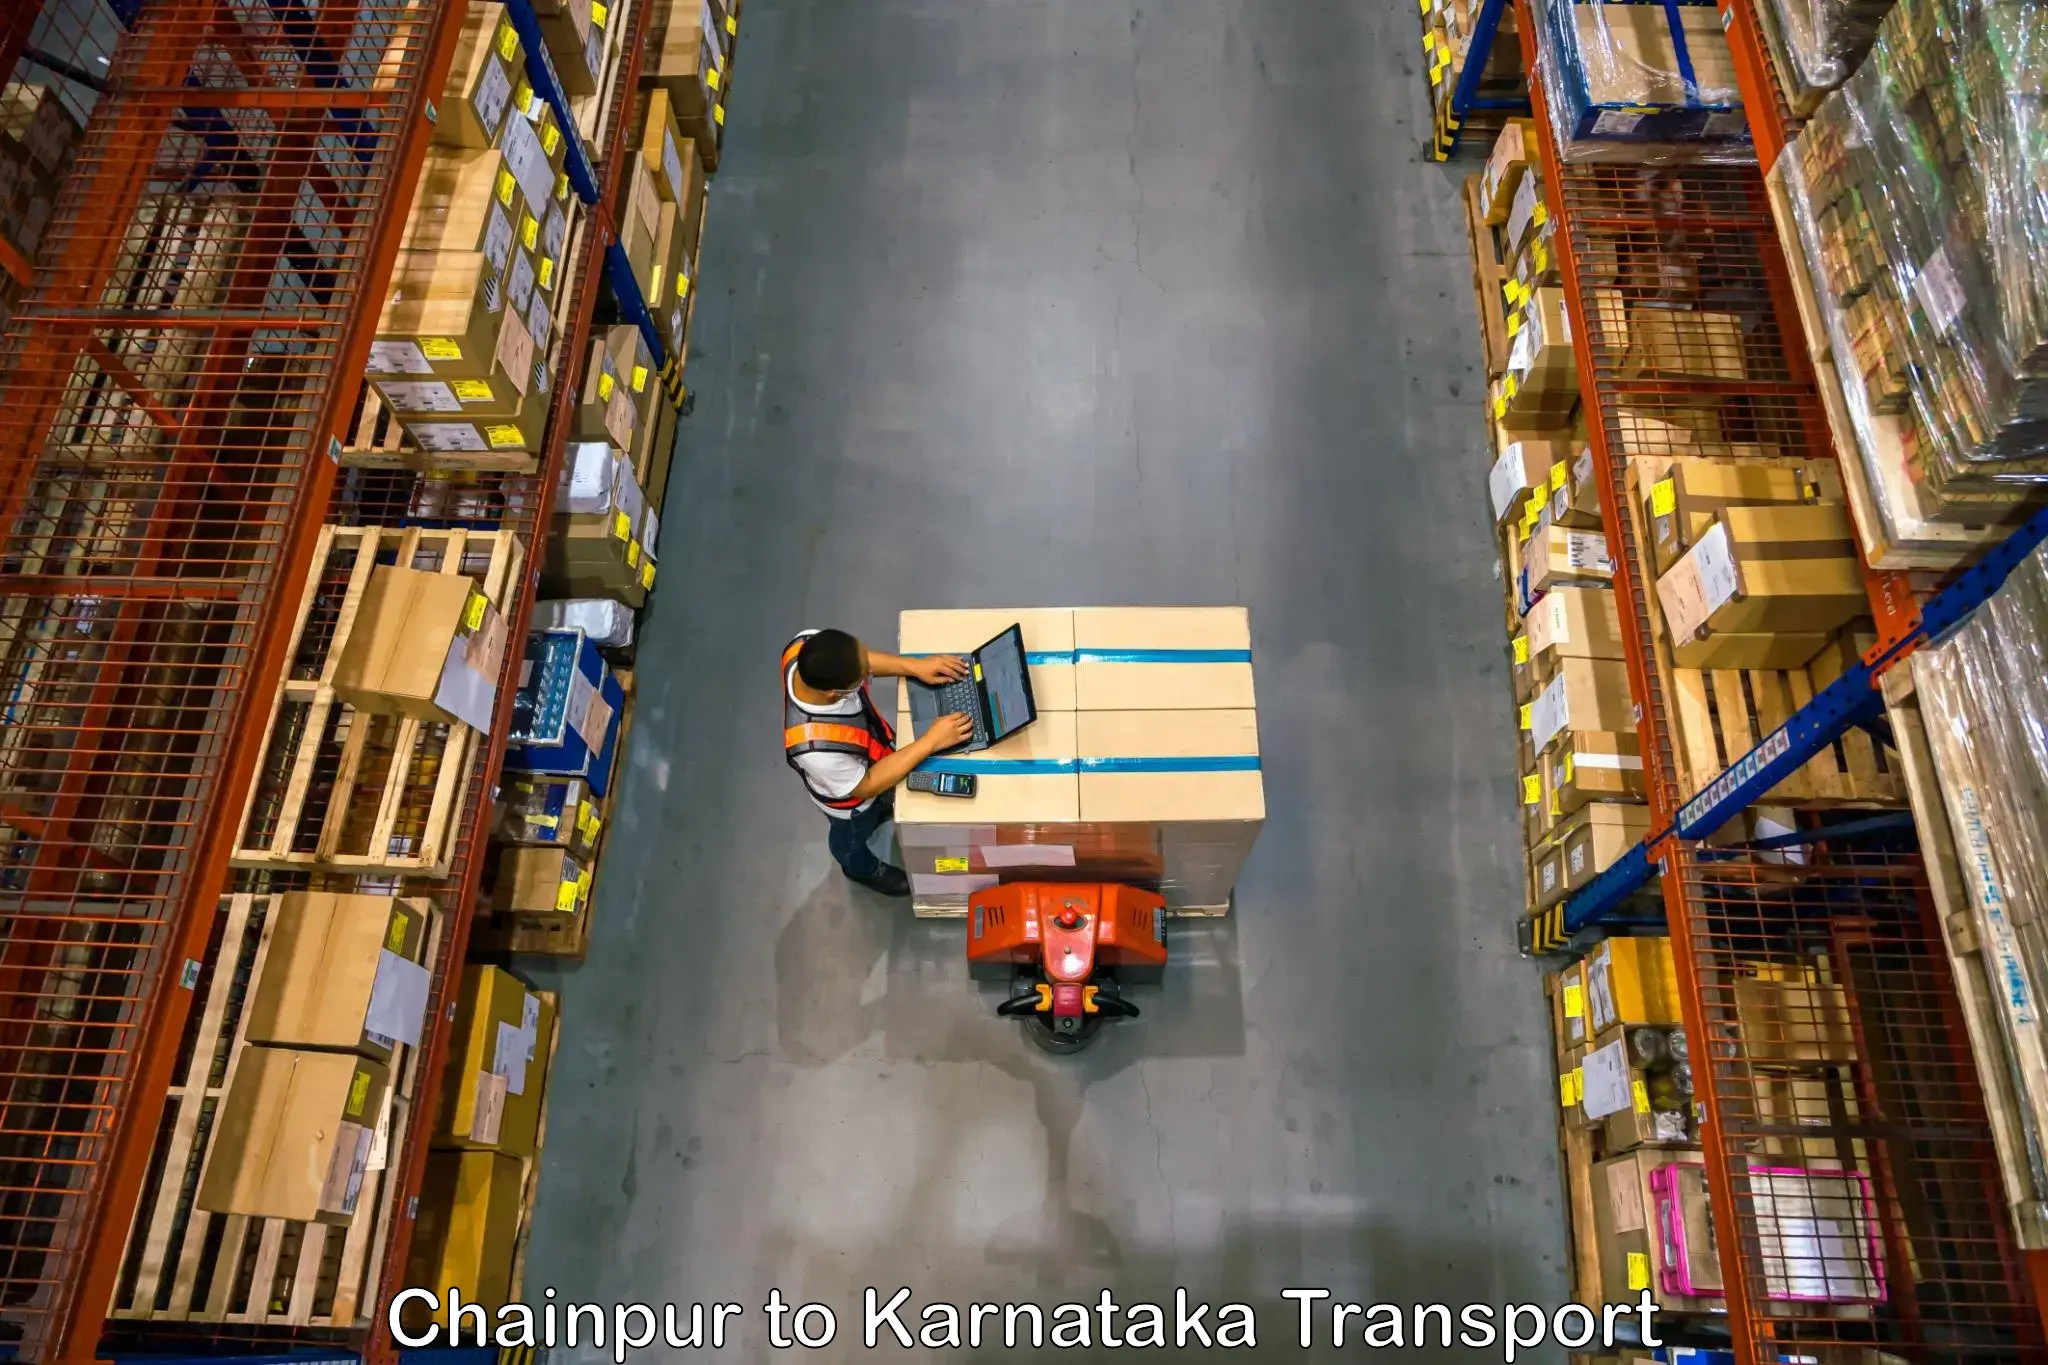 Domestic goods transportation services Chainpur to Tumkur